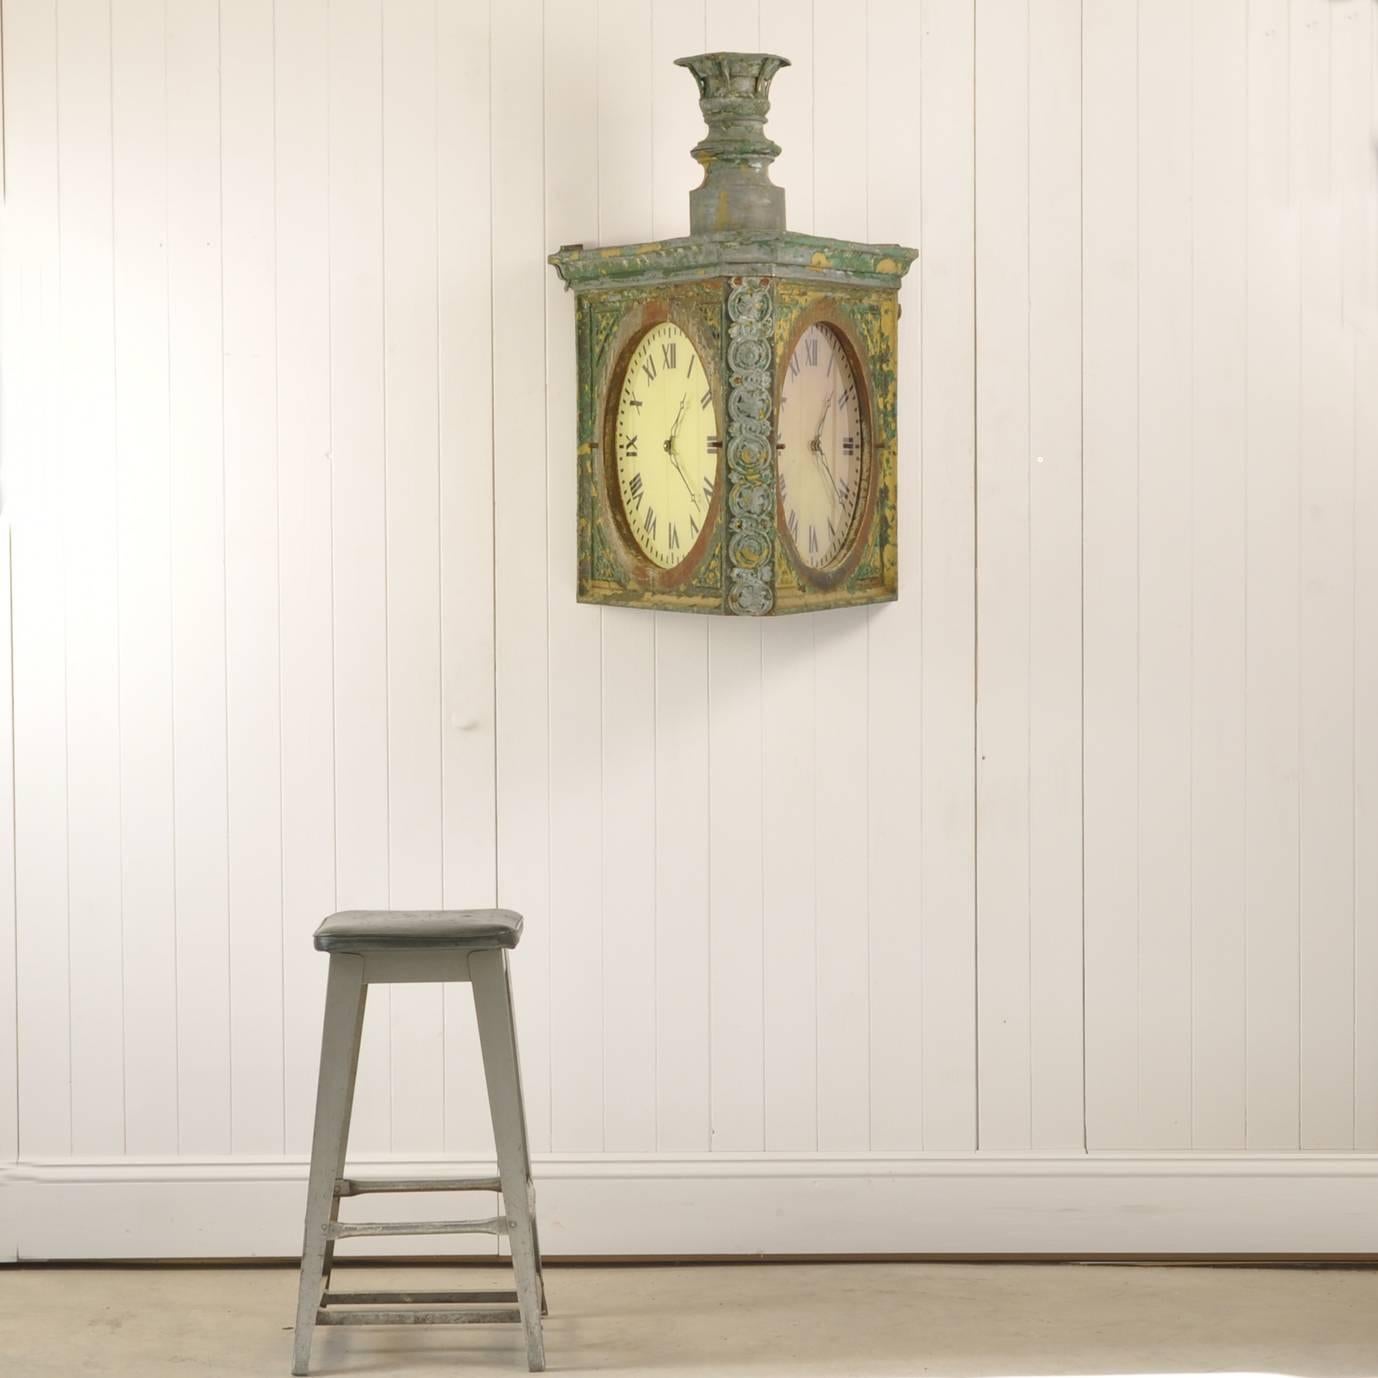 This is first time we have seen a clock like this. It is double sided and would have been wall-mounted. It is late 19th century, Dutch. 

The body is cast iron with a lead relief down the front and the top and the chimney is zinc. Originally this